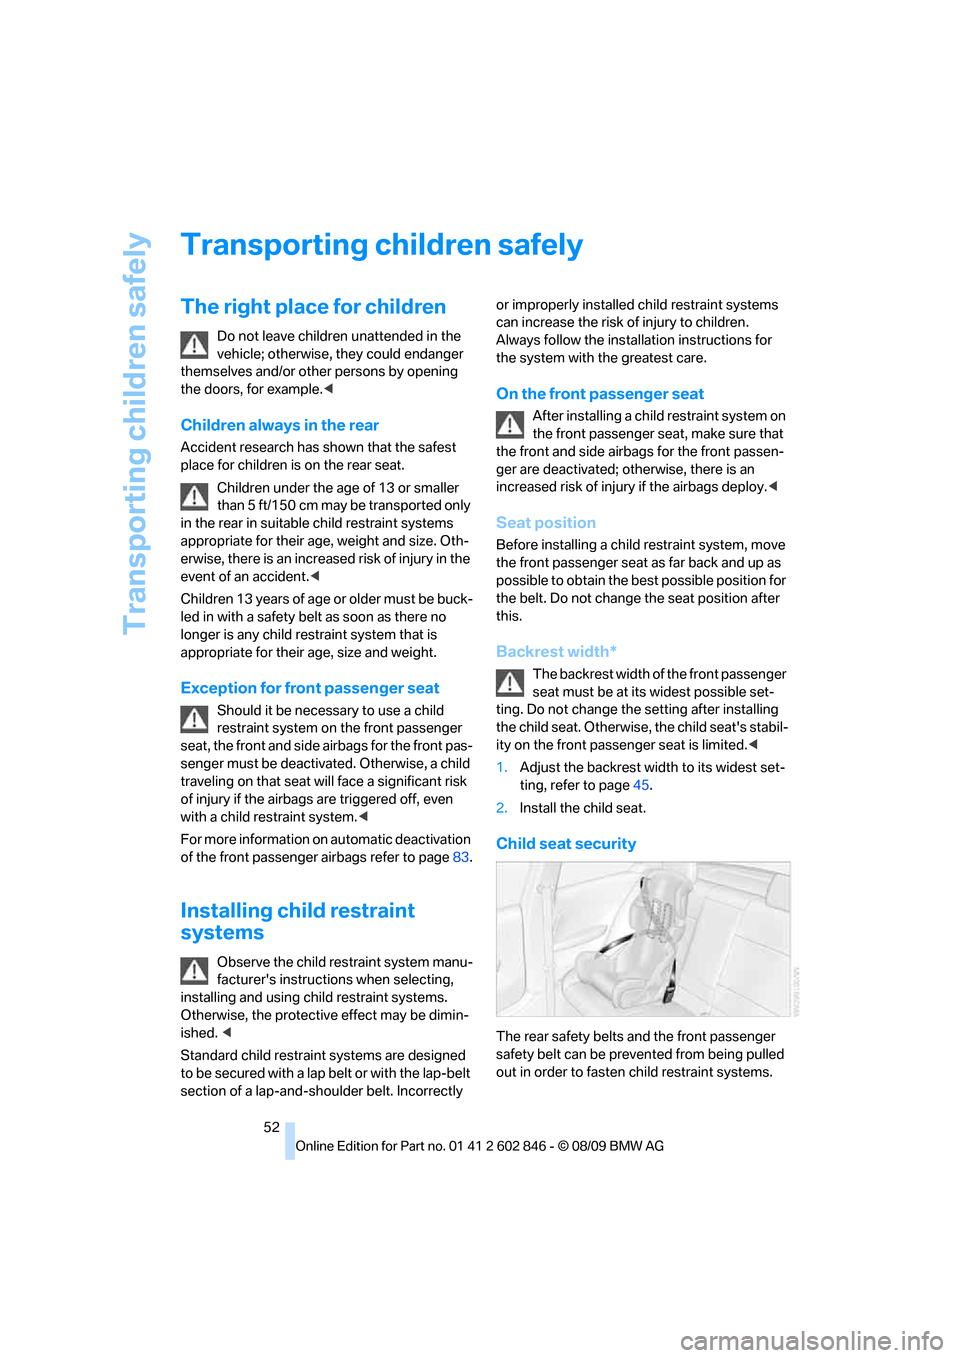 BMW 135I 2010 E81 Workshop Manual Transporting children safely
52
Transporting children safely
The right place for children
Do not leave children unattended in the 
vehicle; otherwise, they could endanger 
themselves and/or other pers